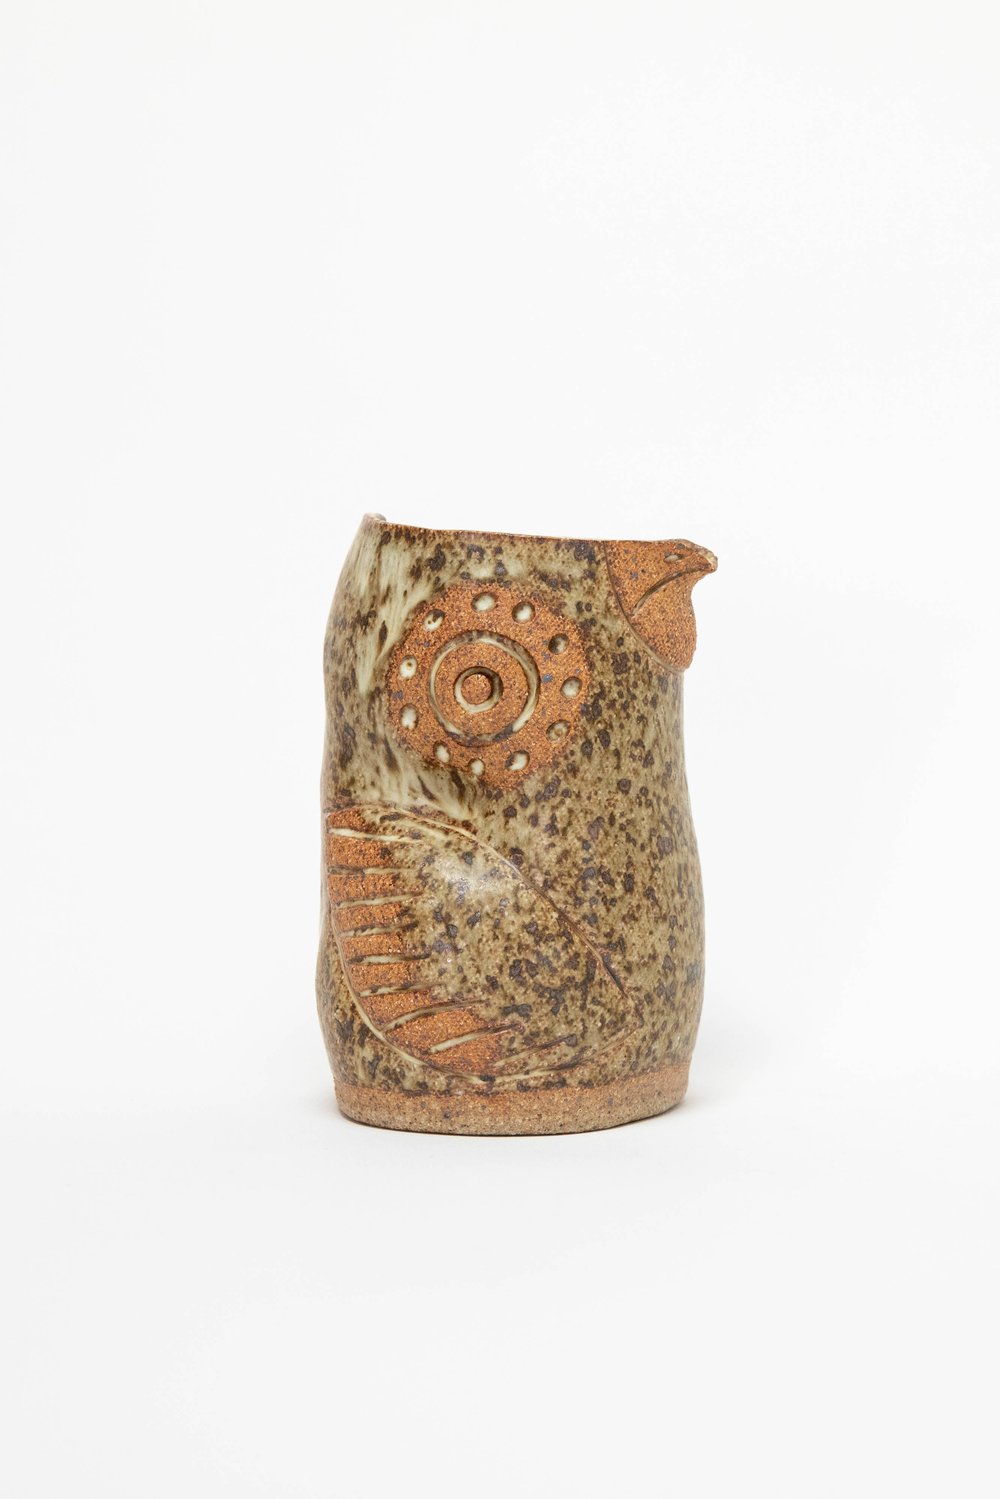 Image of Medium Olive Speckled Flying Dotted Owl Handleless Pitcher